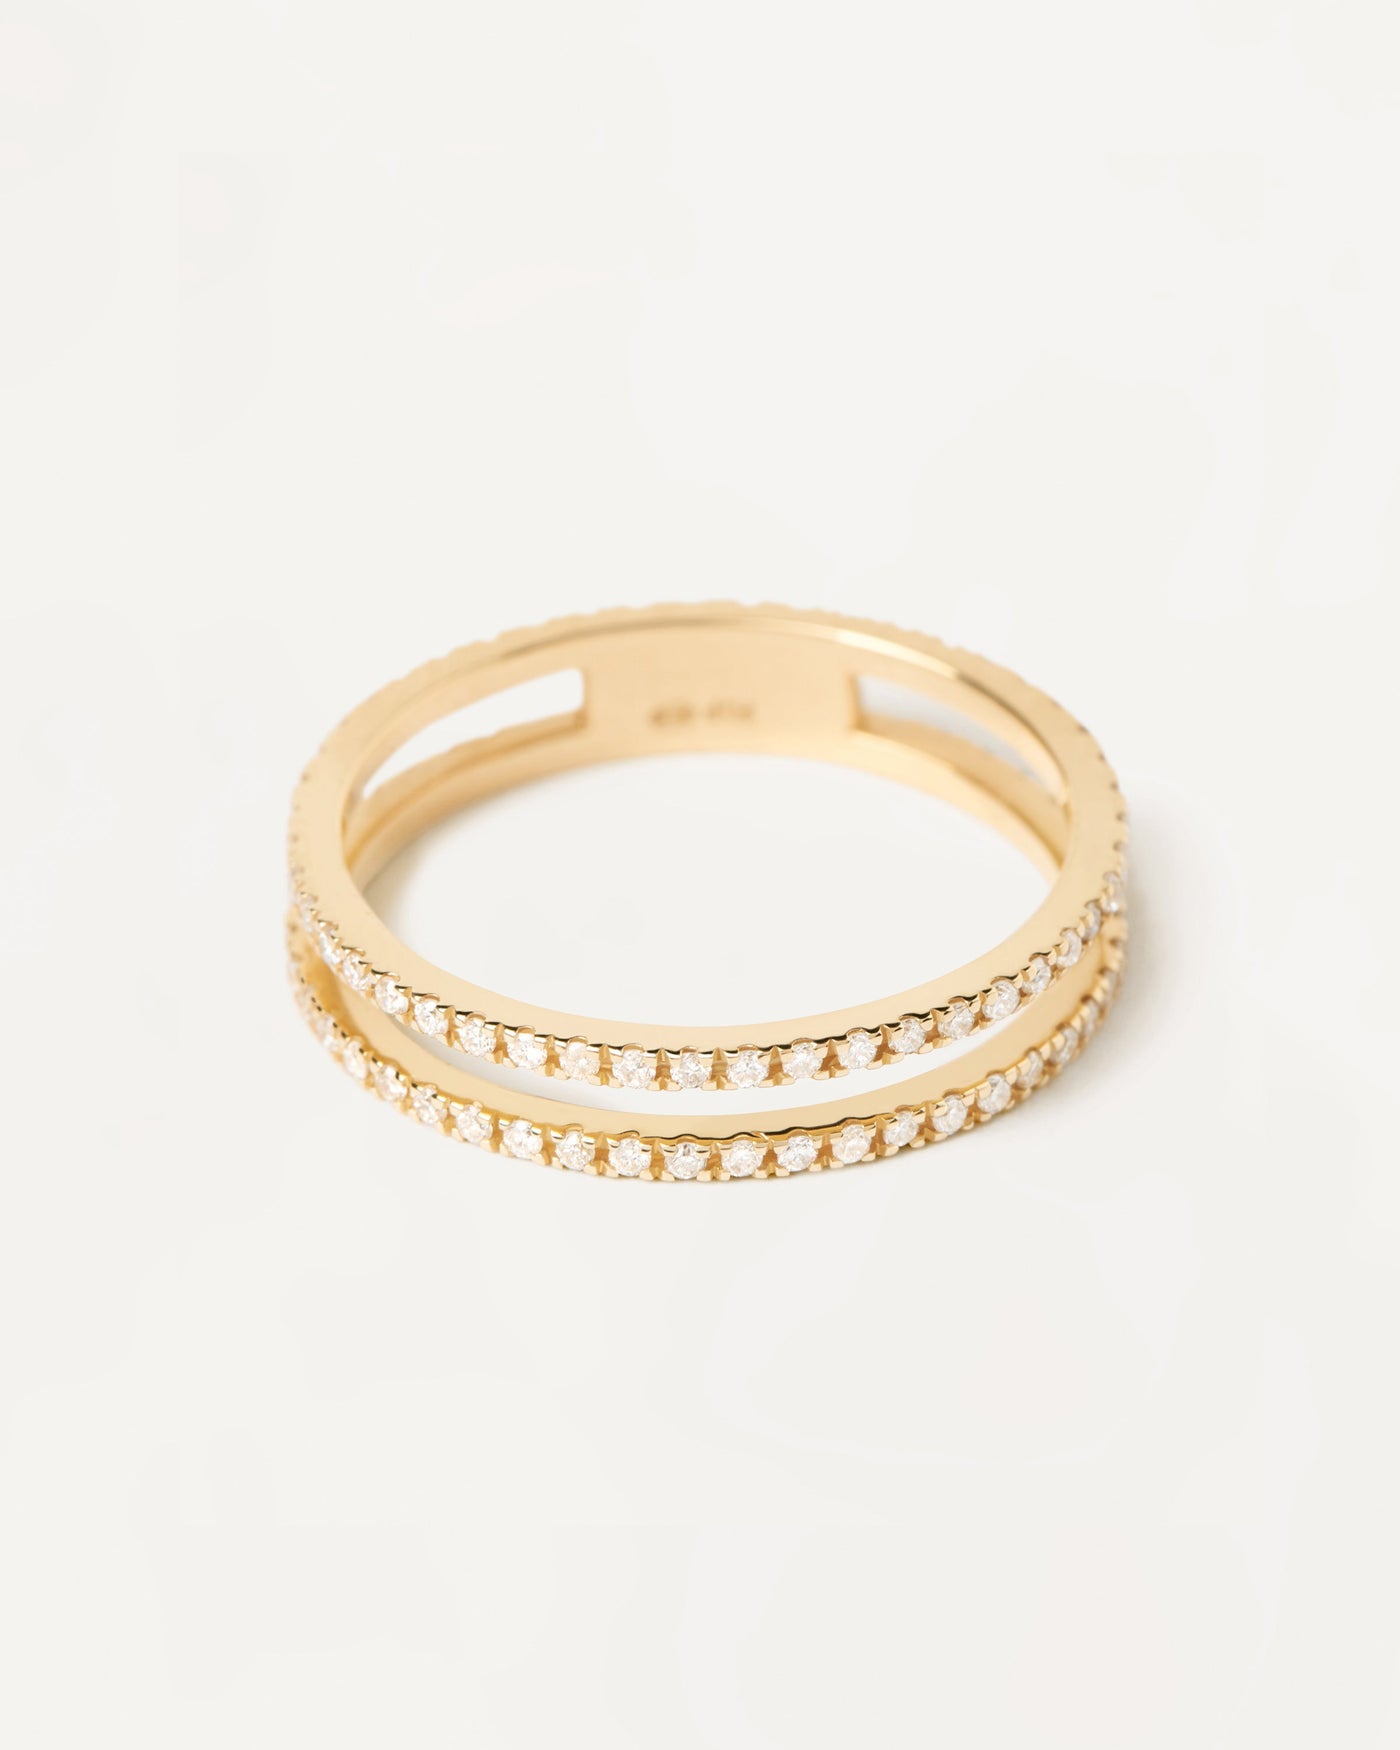 2023 Selection | Diamonds And Yellow Gold Eternity Dual Ring. Get the latest arrival from PDPAOLA. Place your order safely and get this Best Seller. Free Shipping over 40€